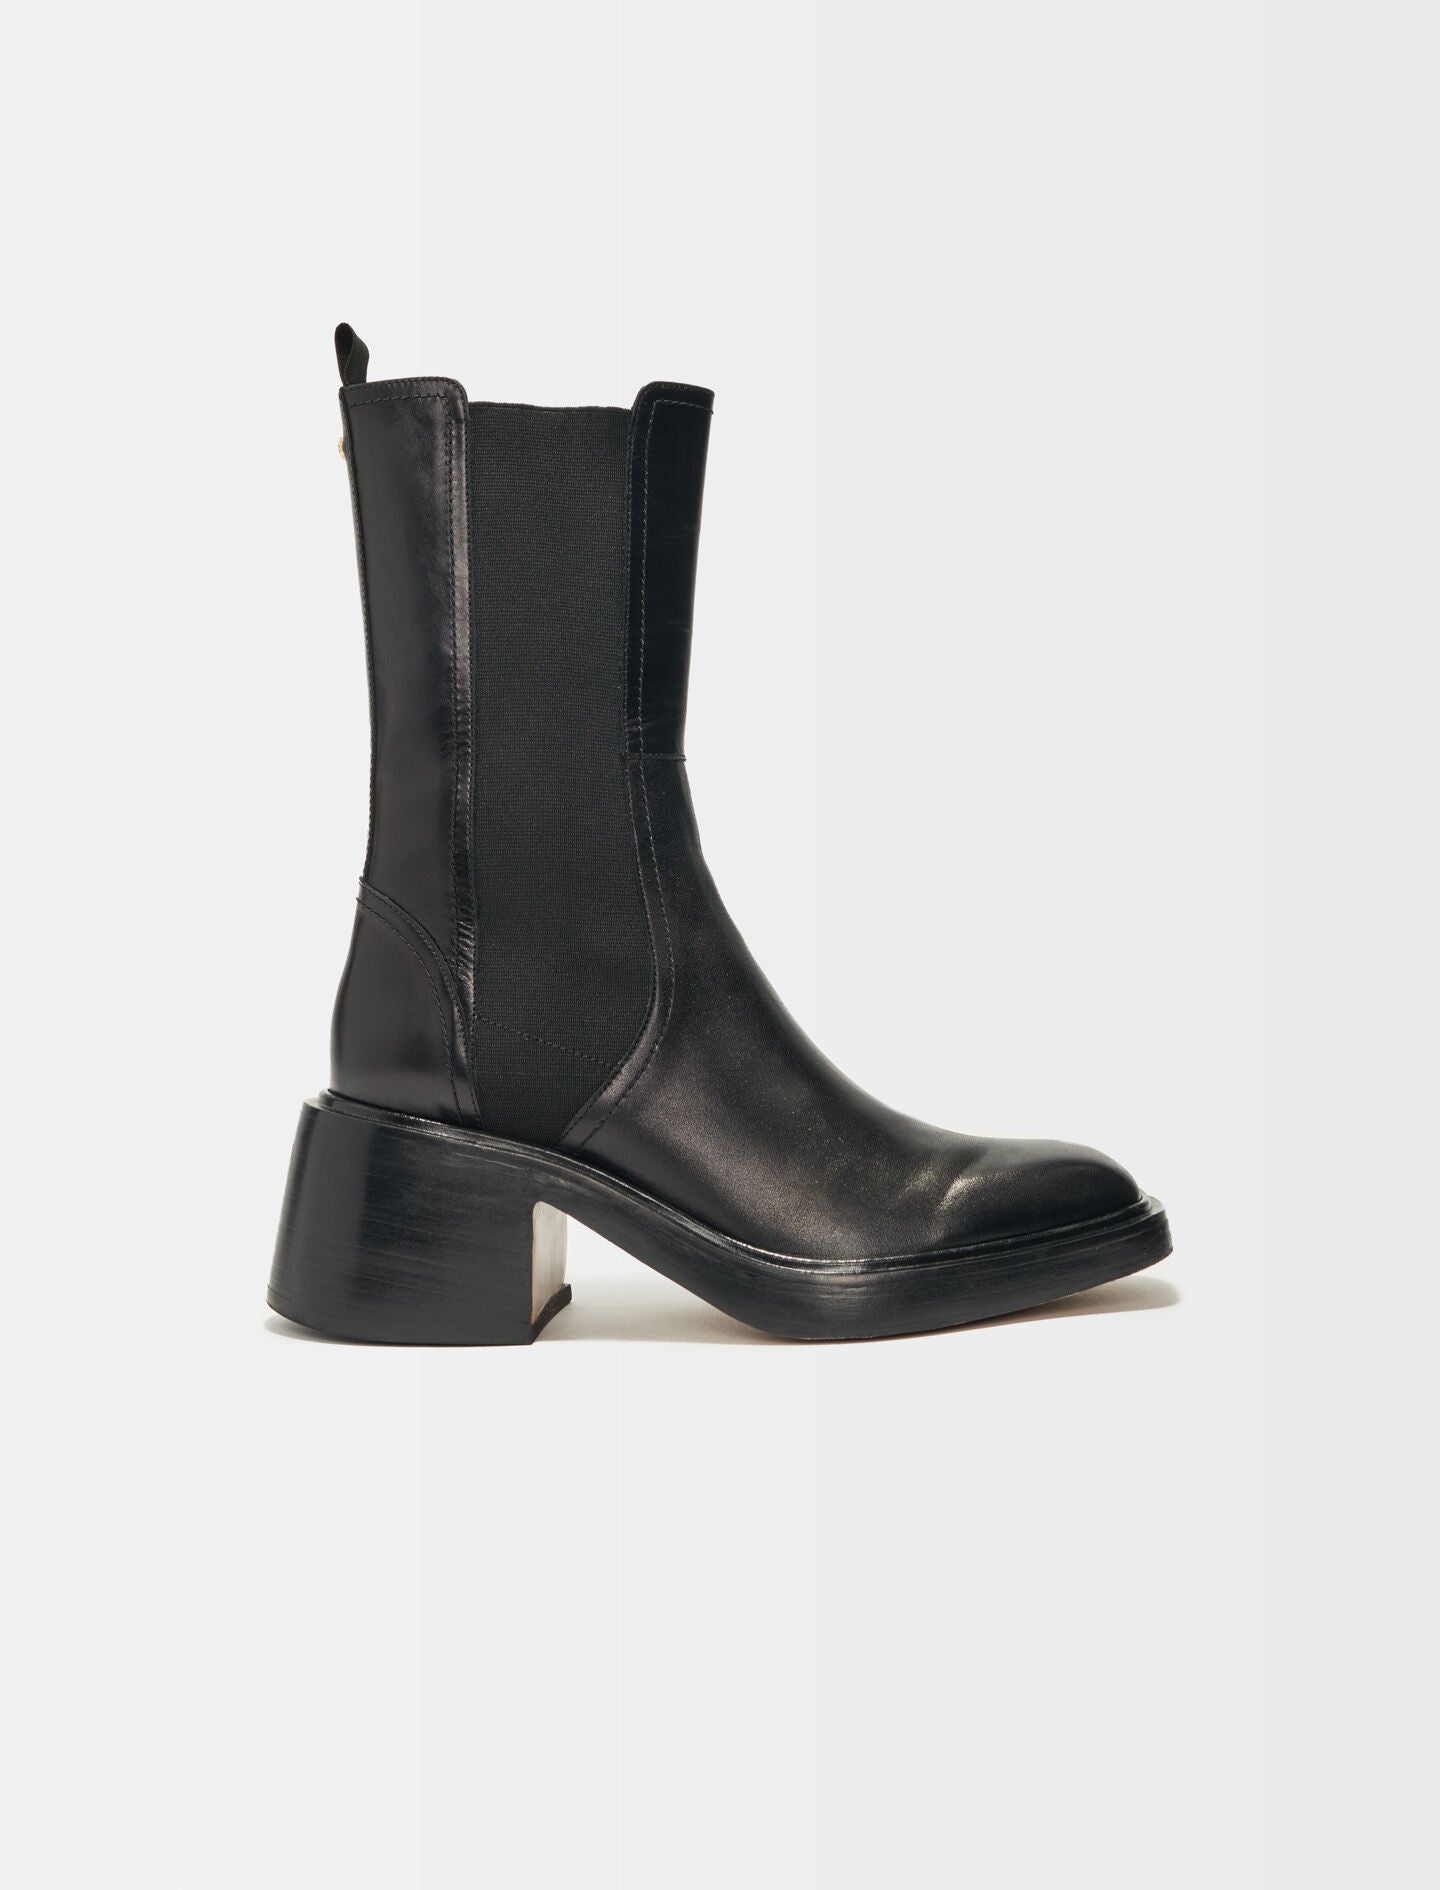 Black-featured-black leather ankle boots and square toe